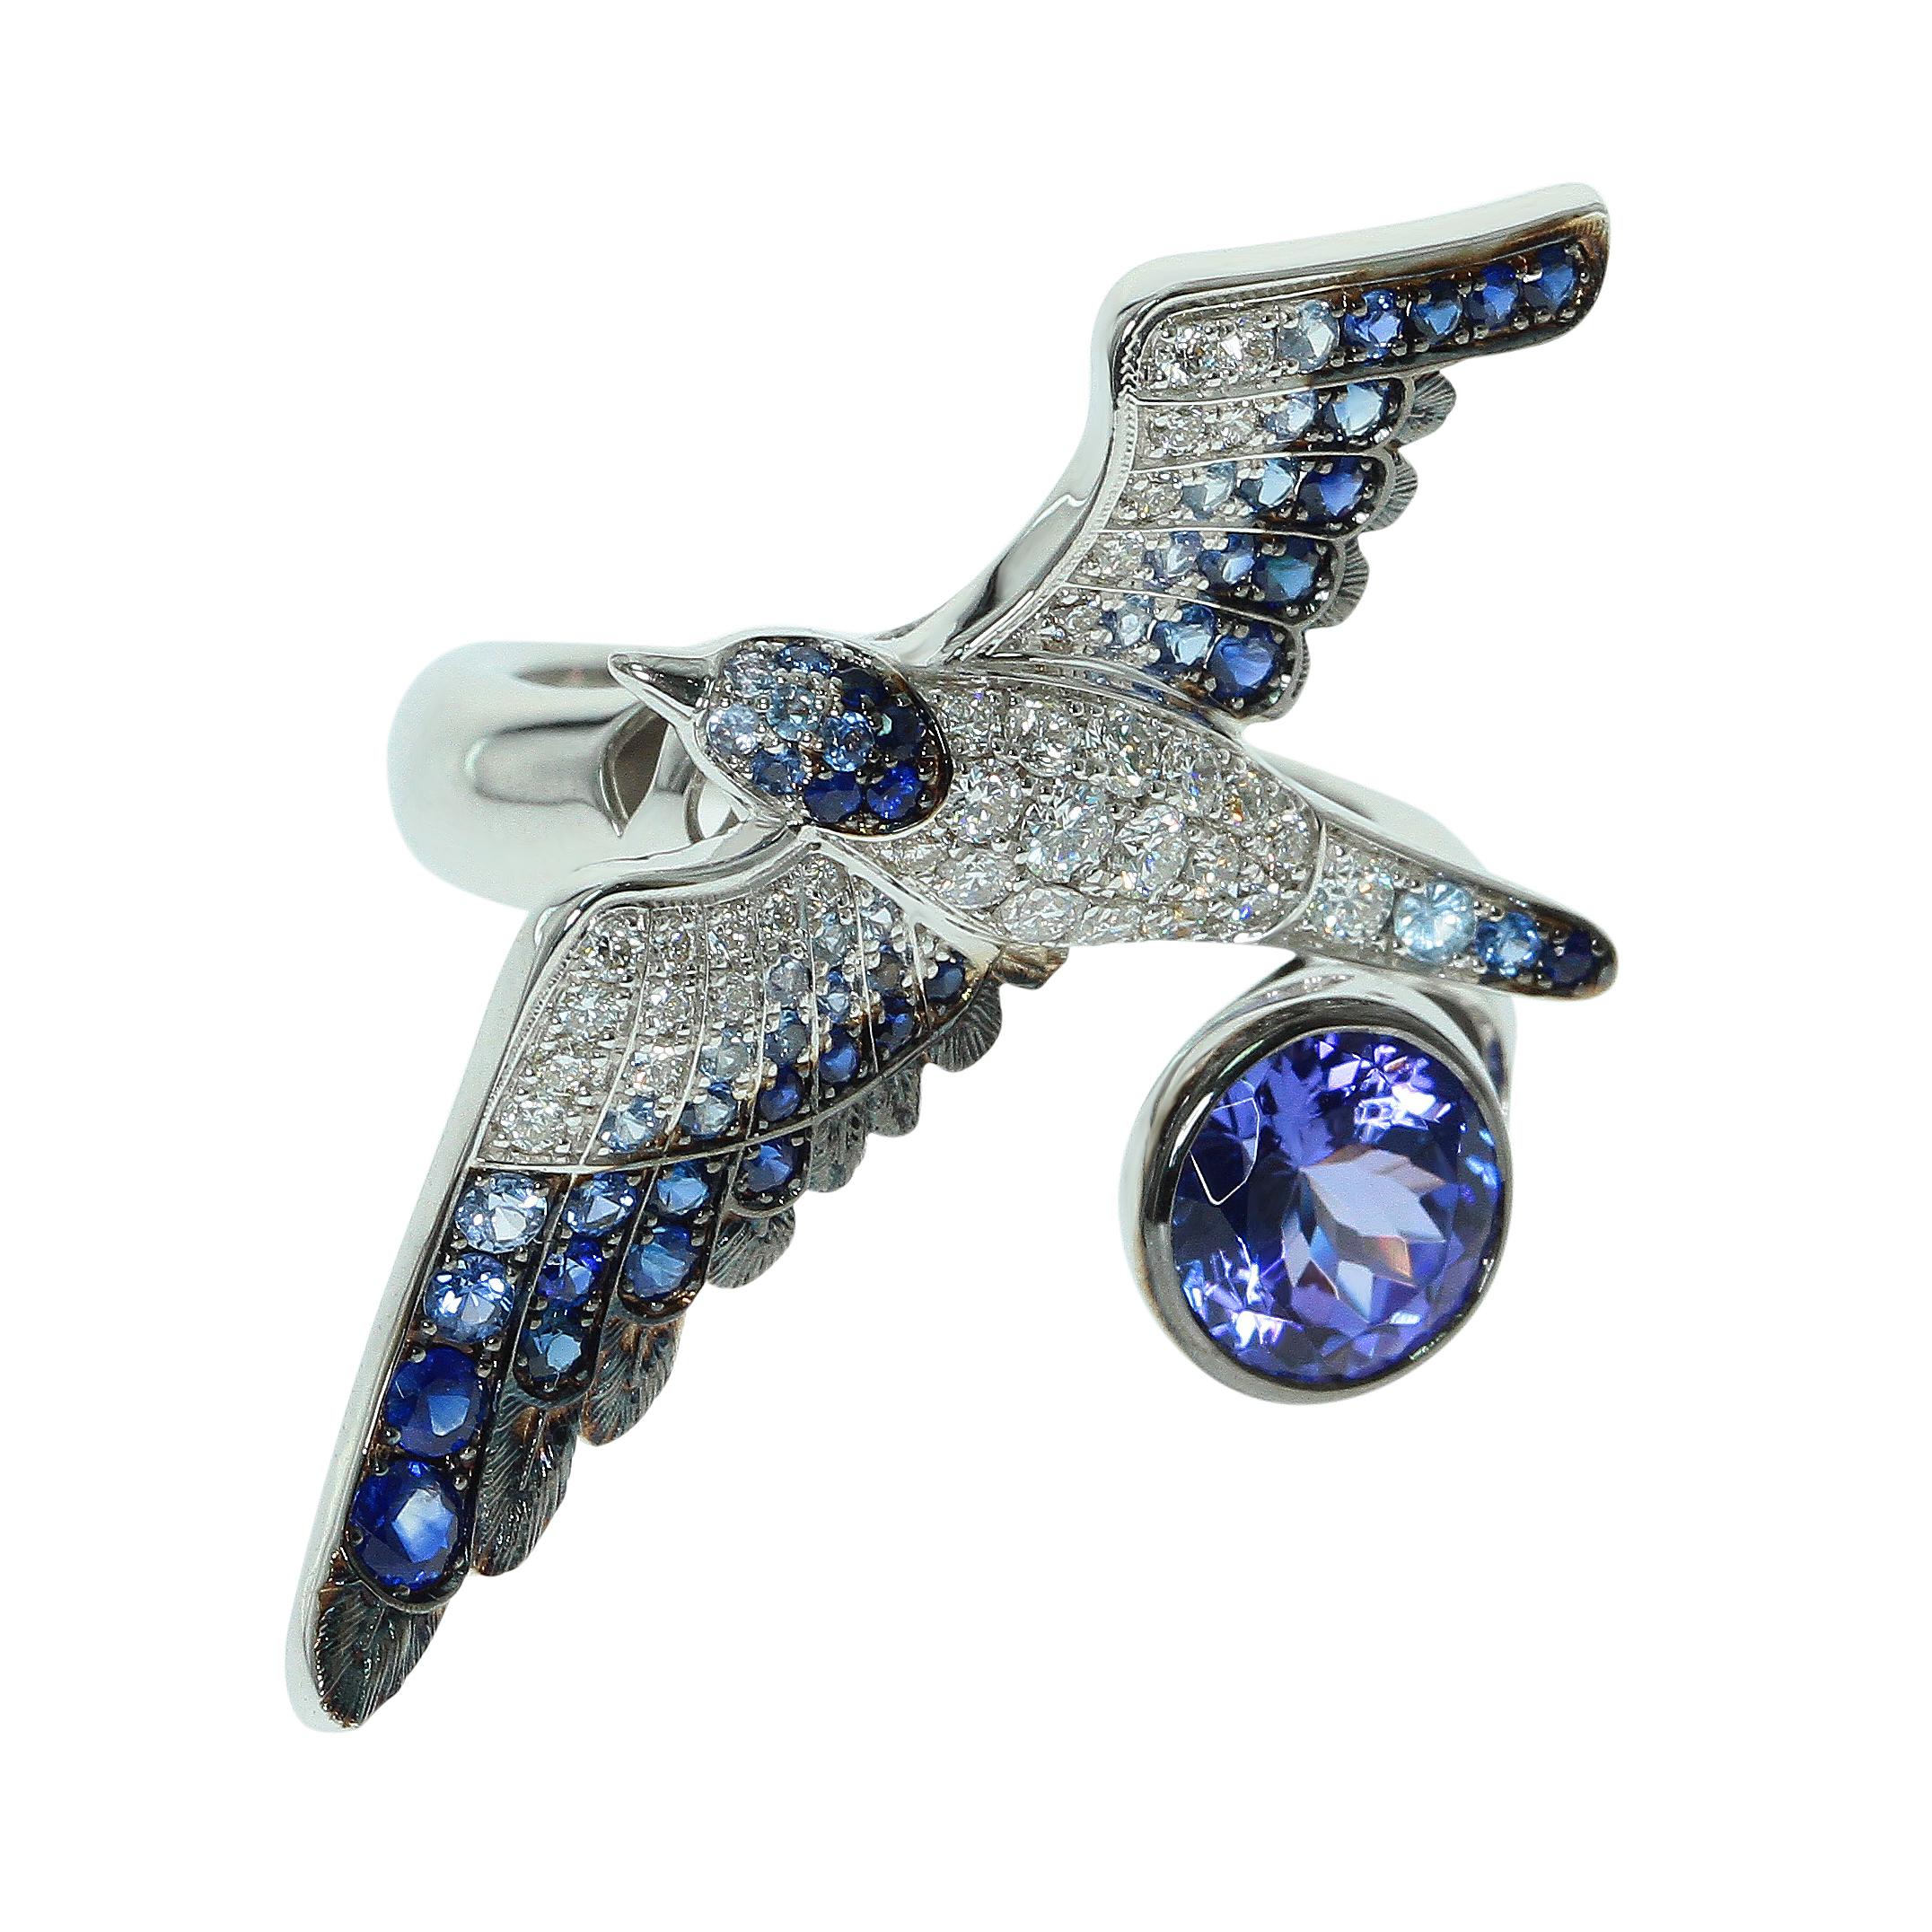 Tanzanite Diamonds Sapphire 18 Karat White Gold Seagull Ring
Highly detailed Seagull Ring. Combination of 35 White Diamonds and 52 Blue Sapphires gives fully impression that they are alive. And luminous 1.94 Carat Tanzanite only emphasises it. If